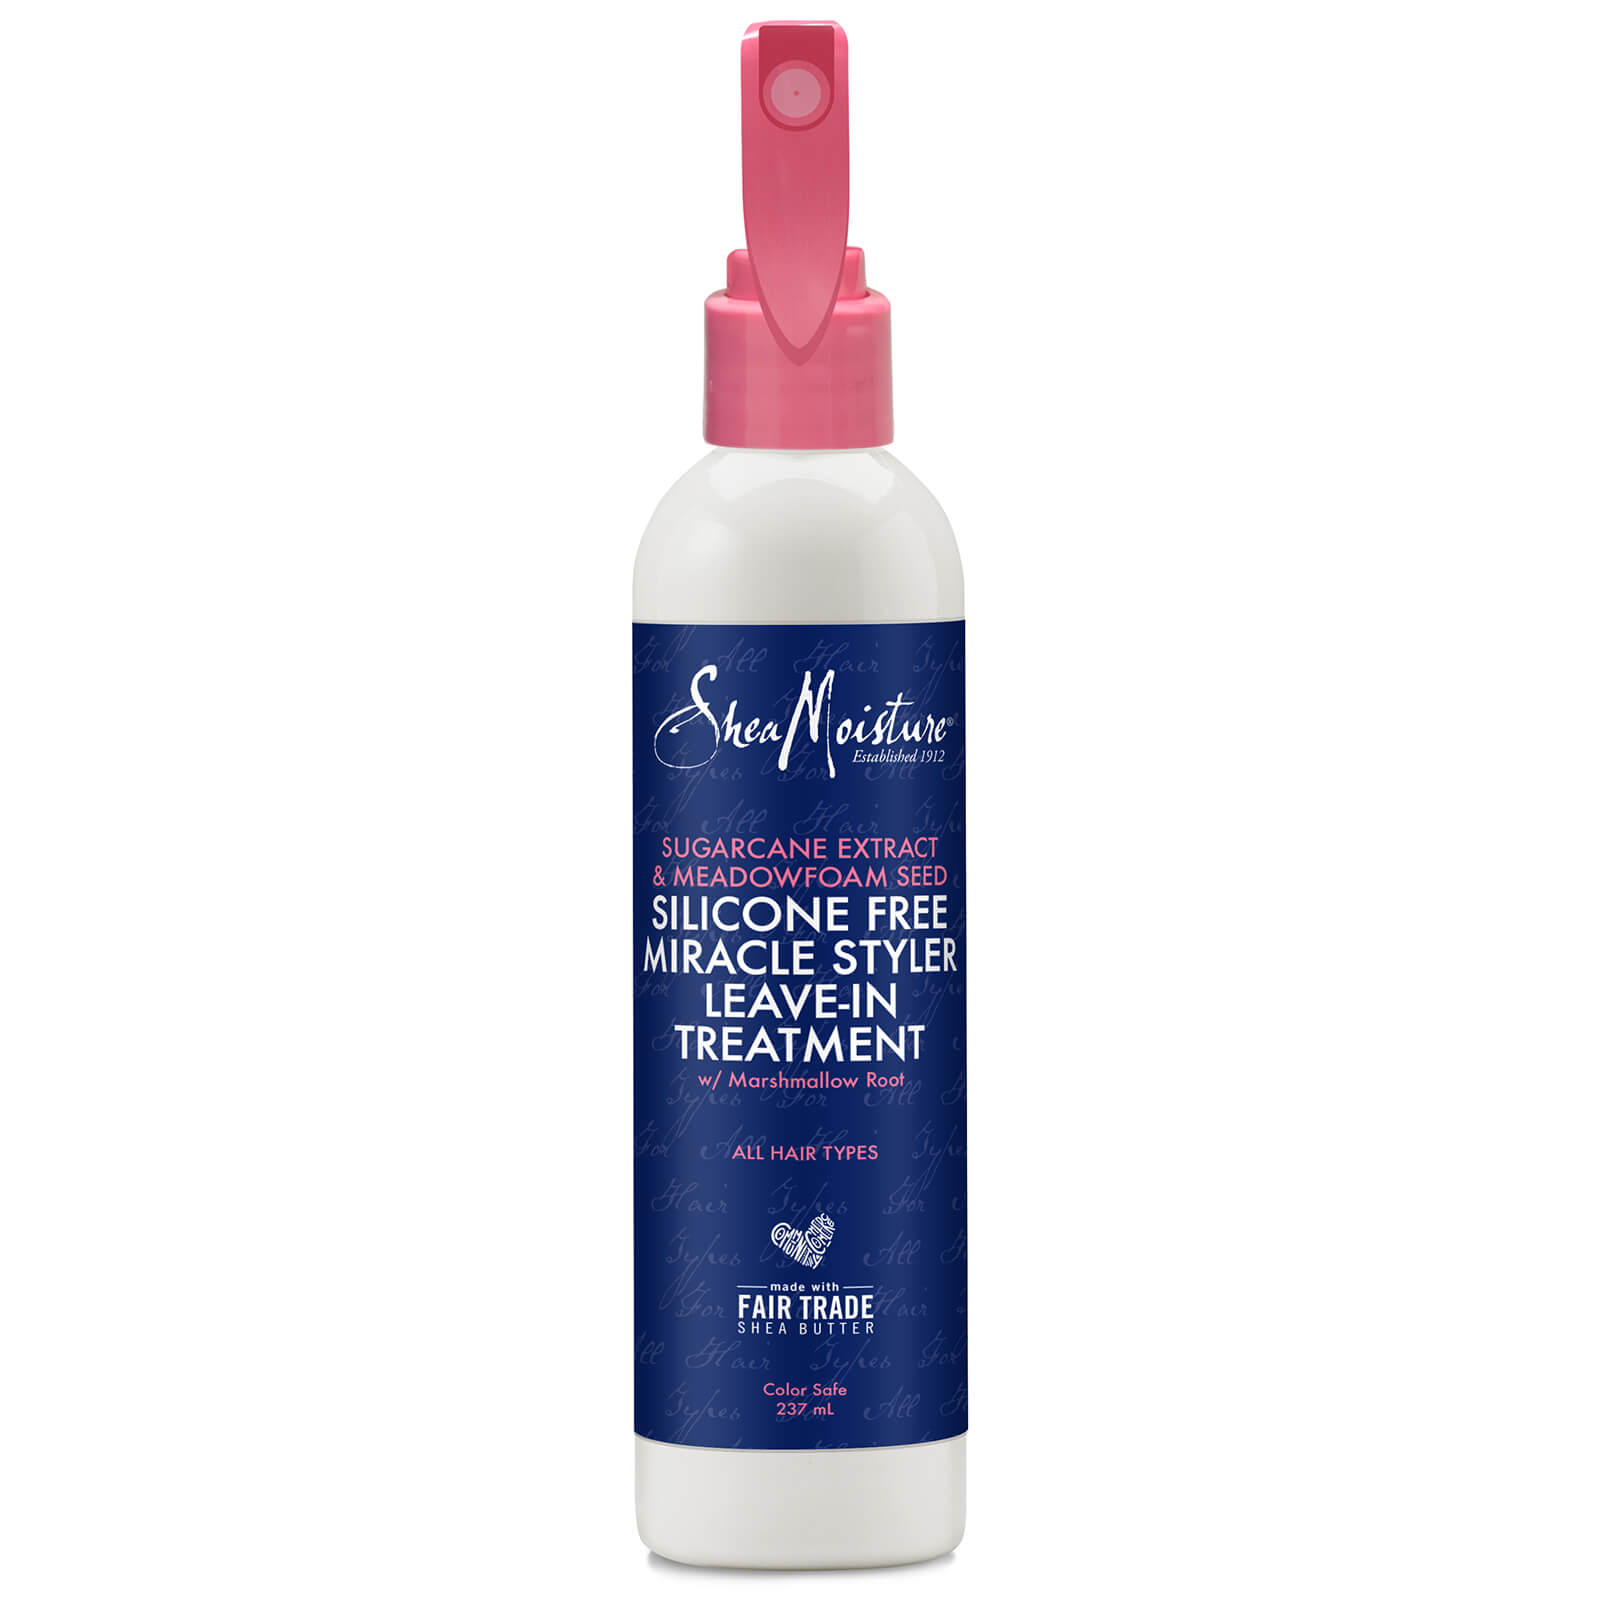 Shea Moisture Silicone Free Miracle Style Leave-In Treatment 237ml von SheaMoisture